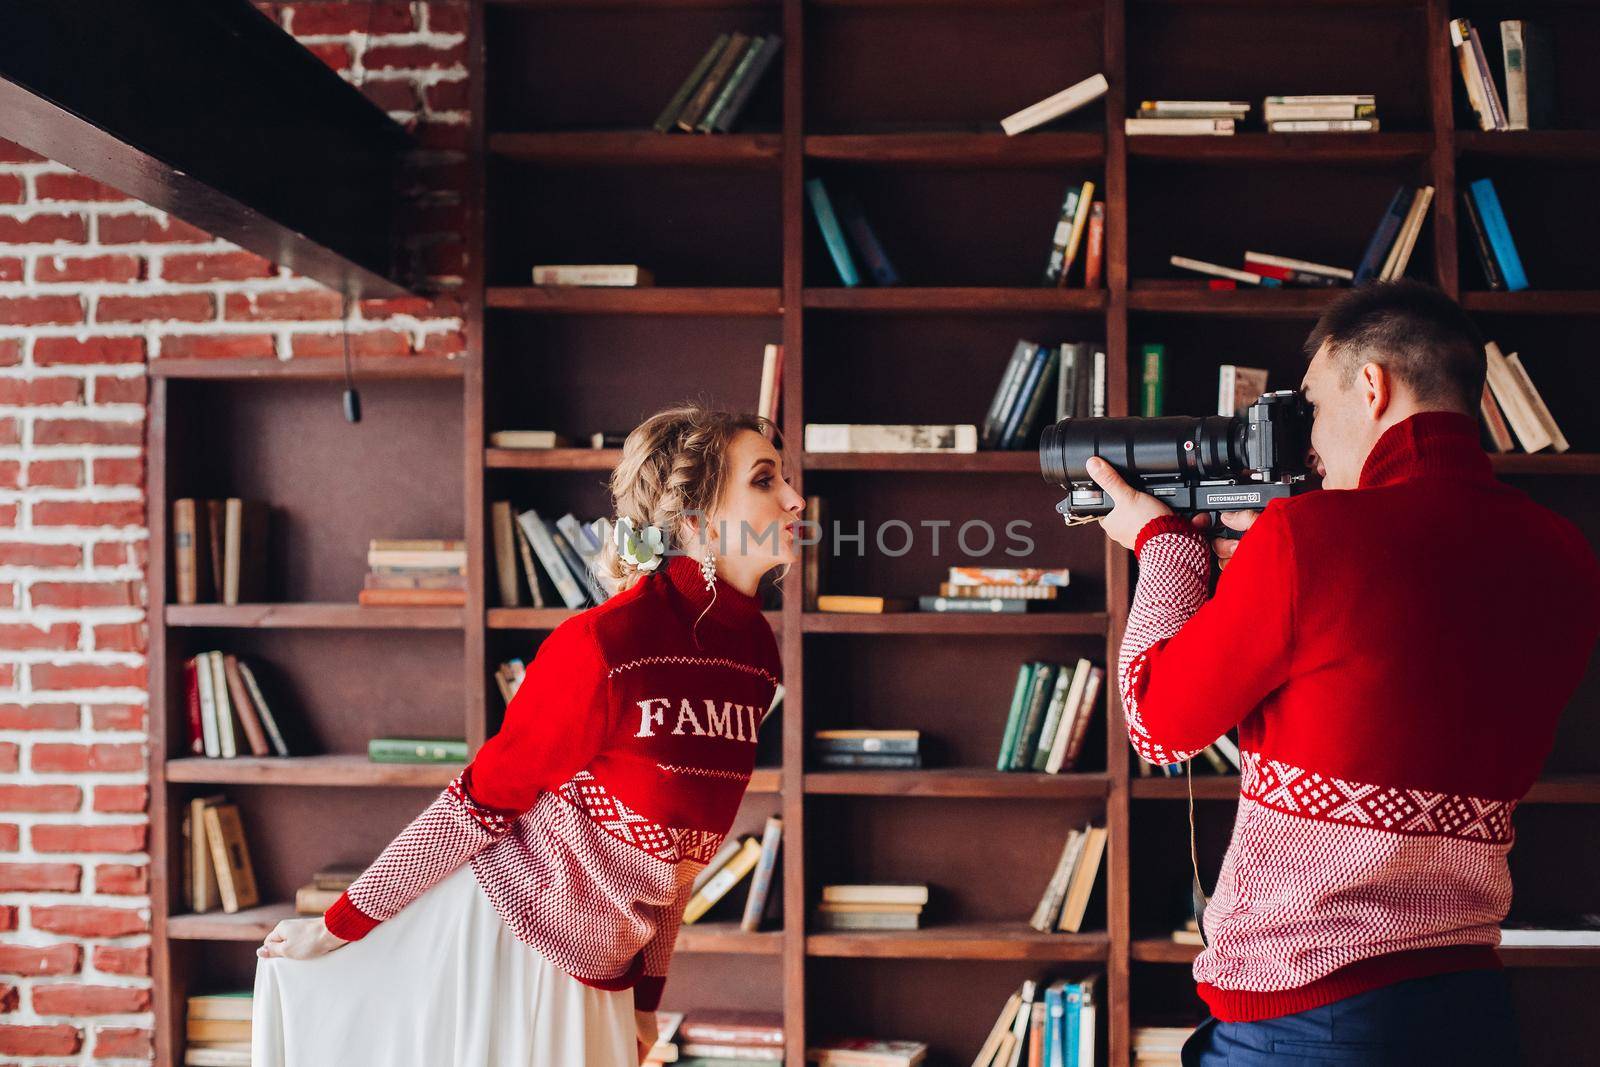 Side view of newlywed in similar red sweater with family word having fun at home. Wife posing to her husband taking photos of her with camera.